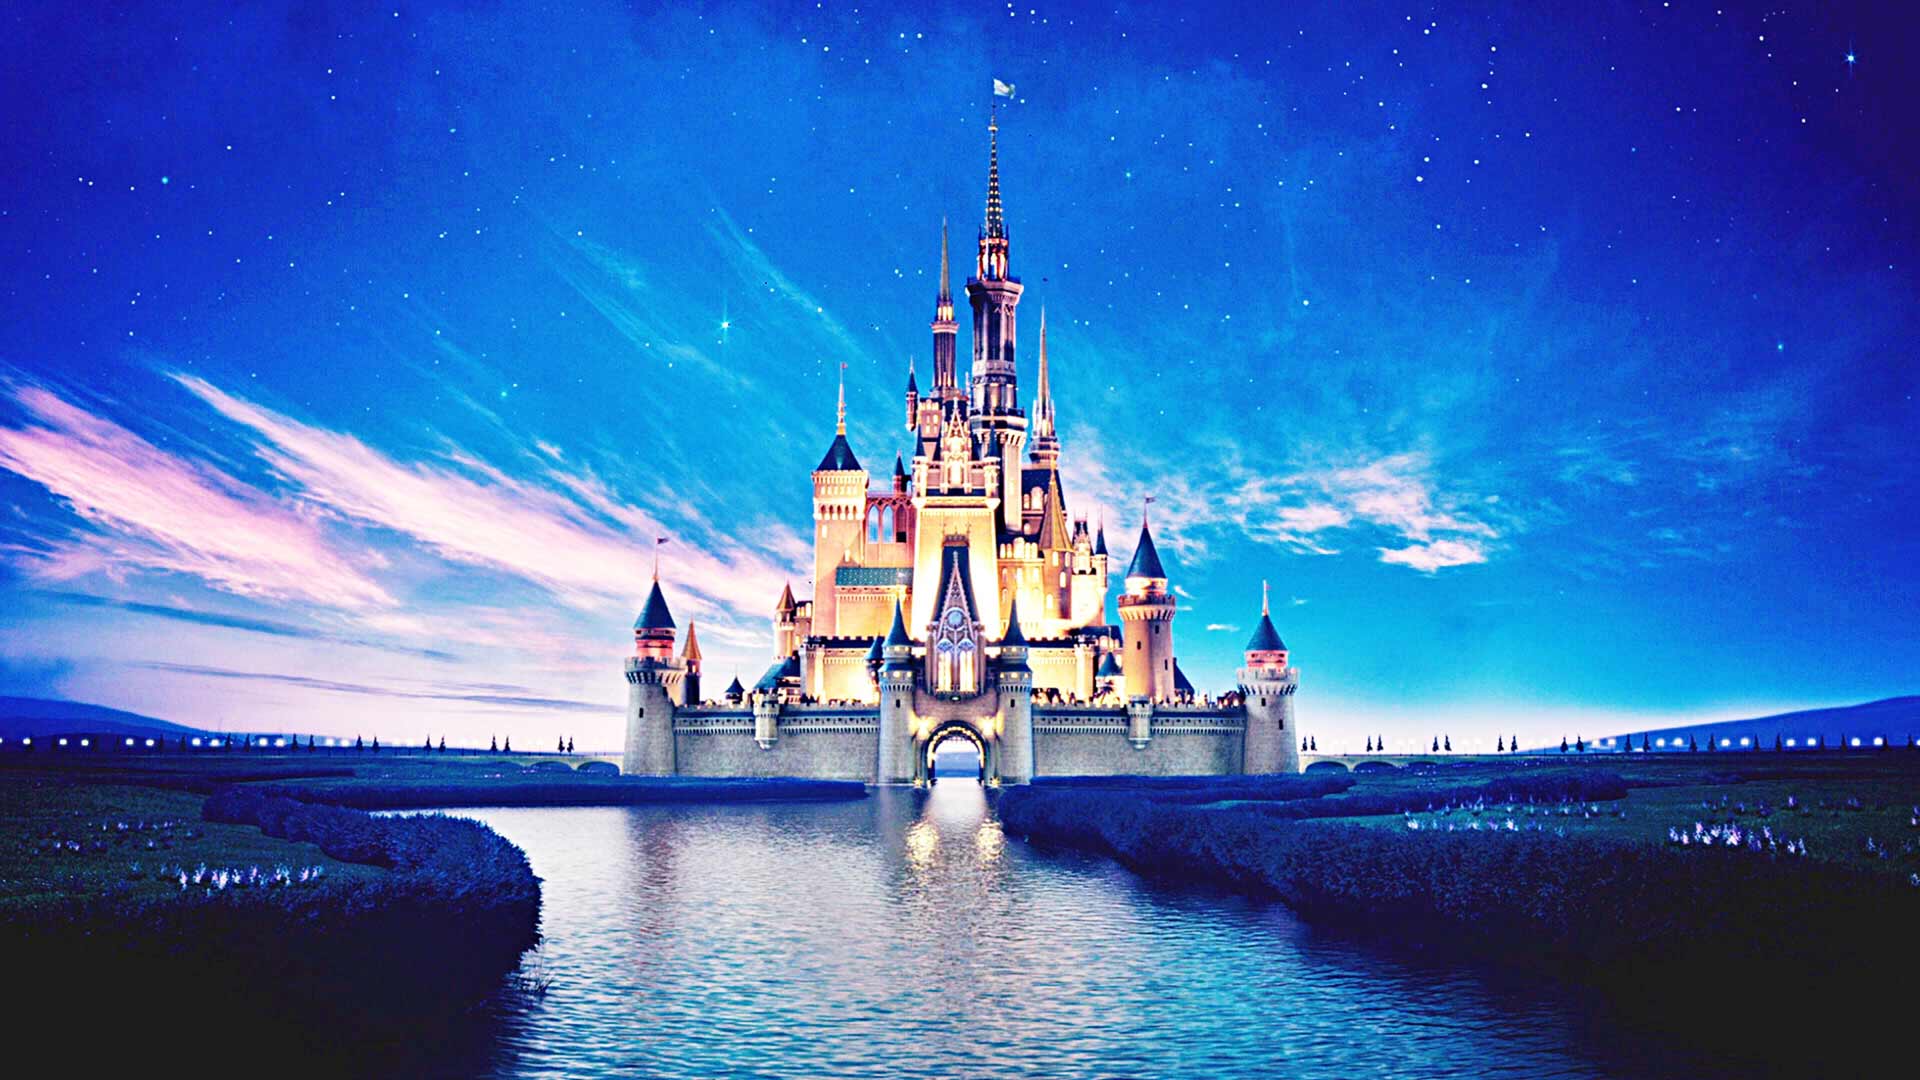 Disney Wallpaper And Background Image  Iphone Disney Backgrounds   720x1280 Wallpaper  teahubio